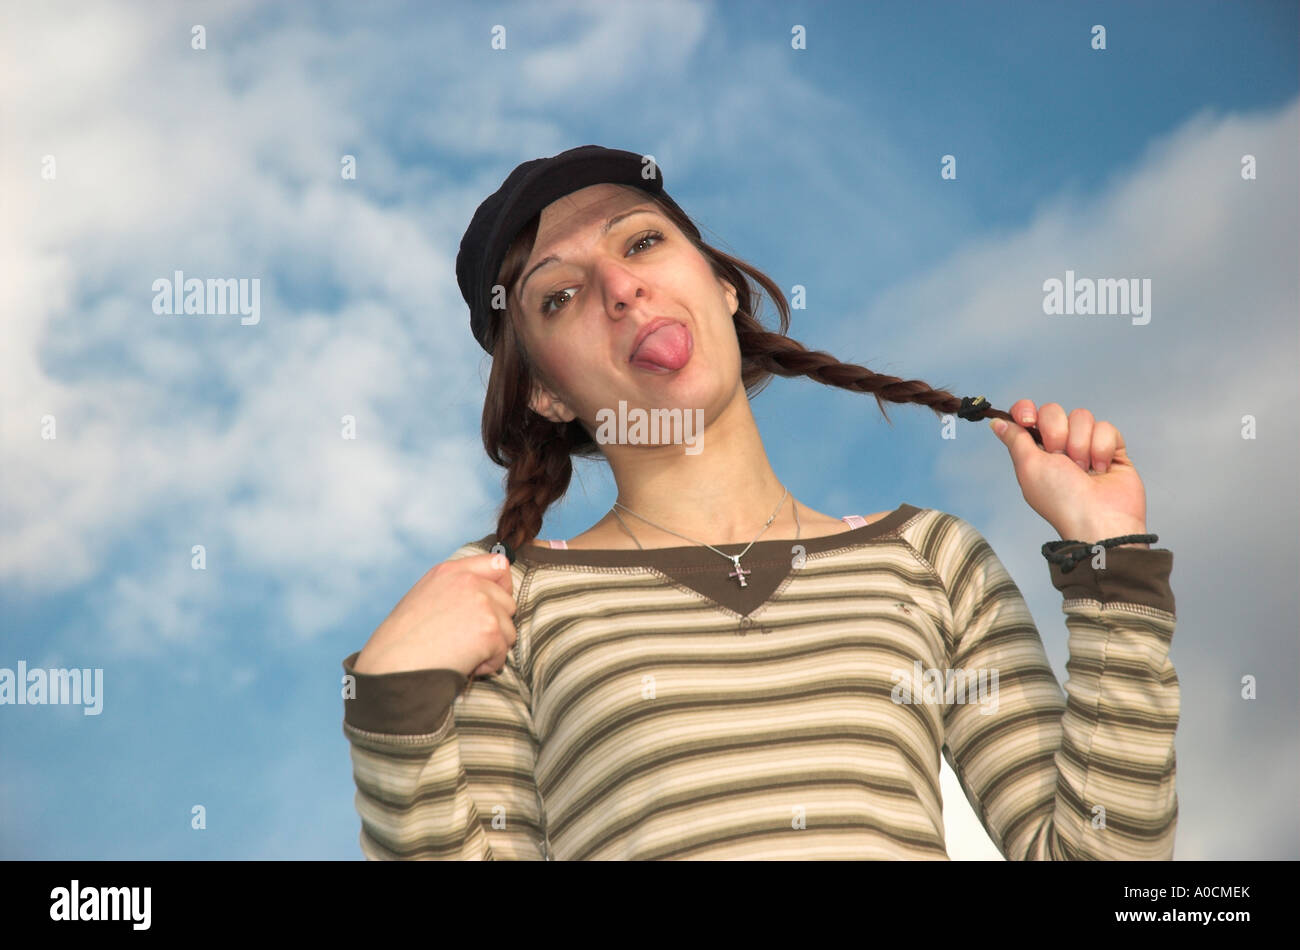 Young Woman Pulling Pigtails Sticking Tongue Out Banque D'Images